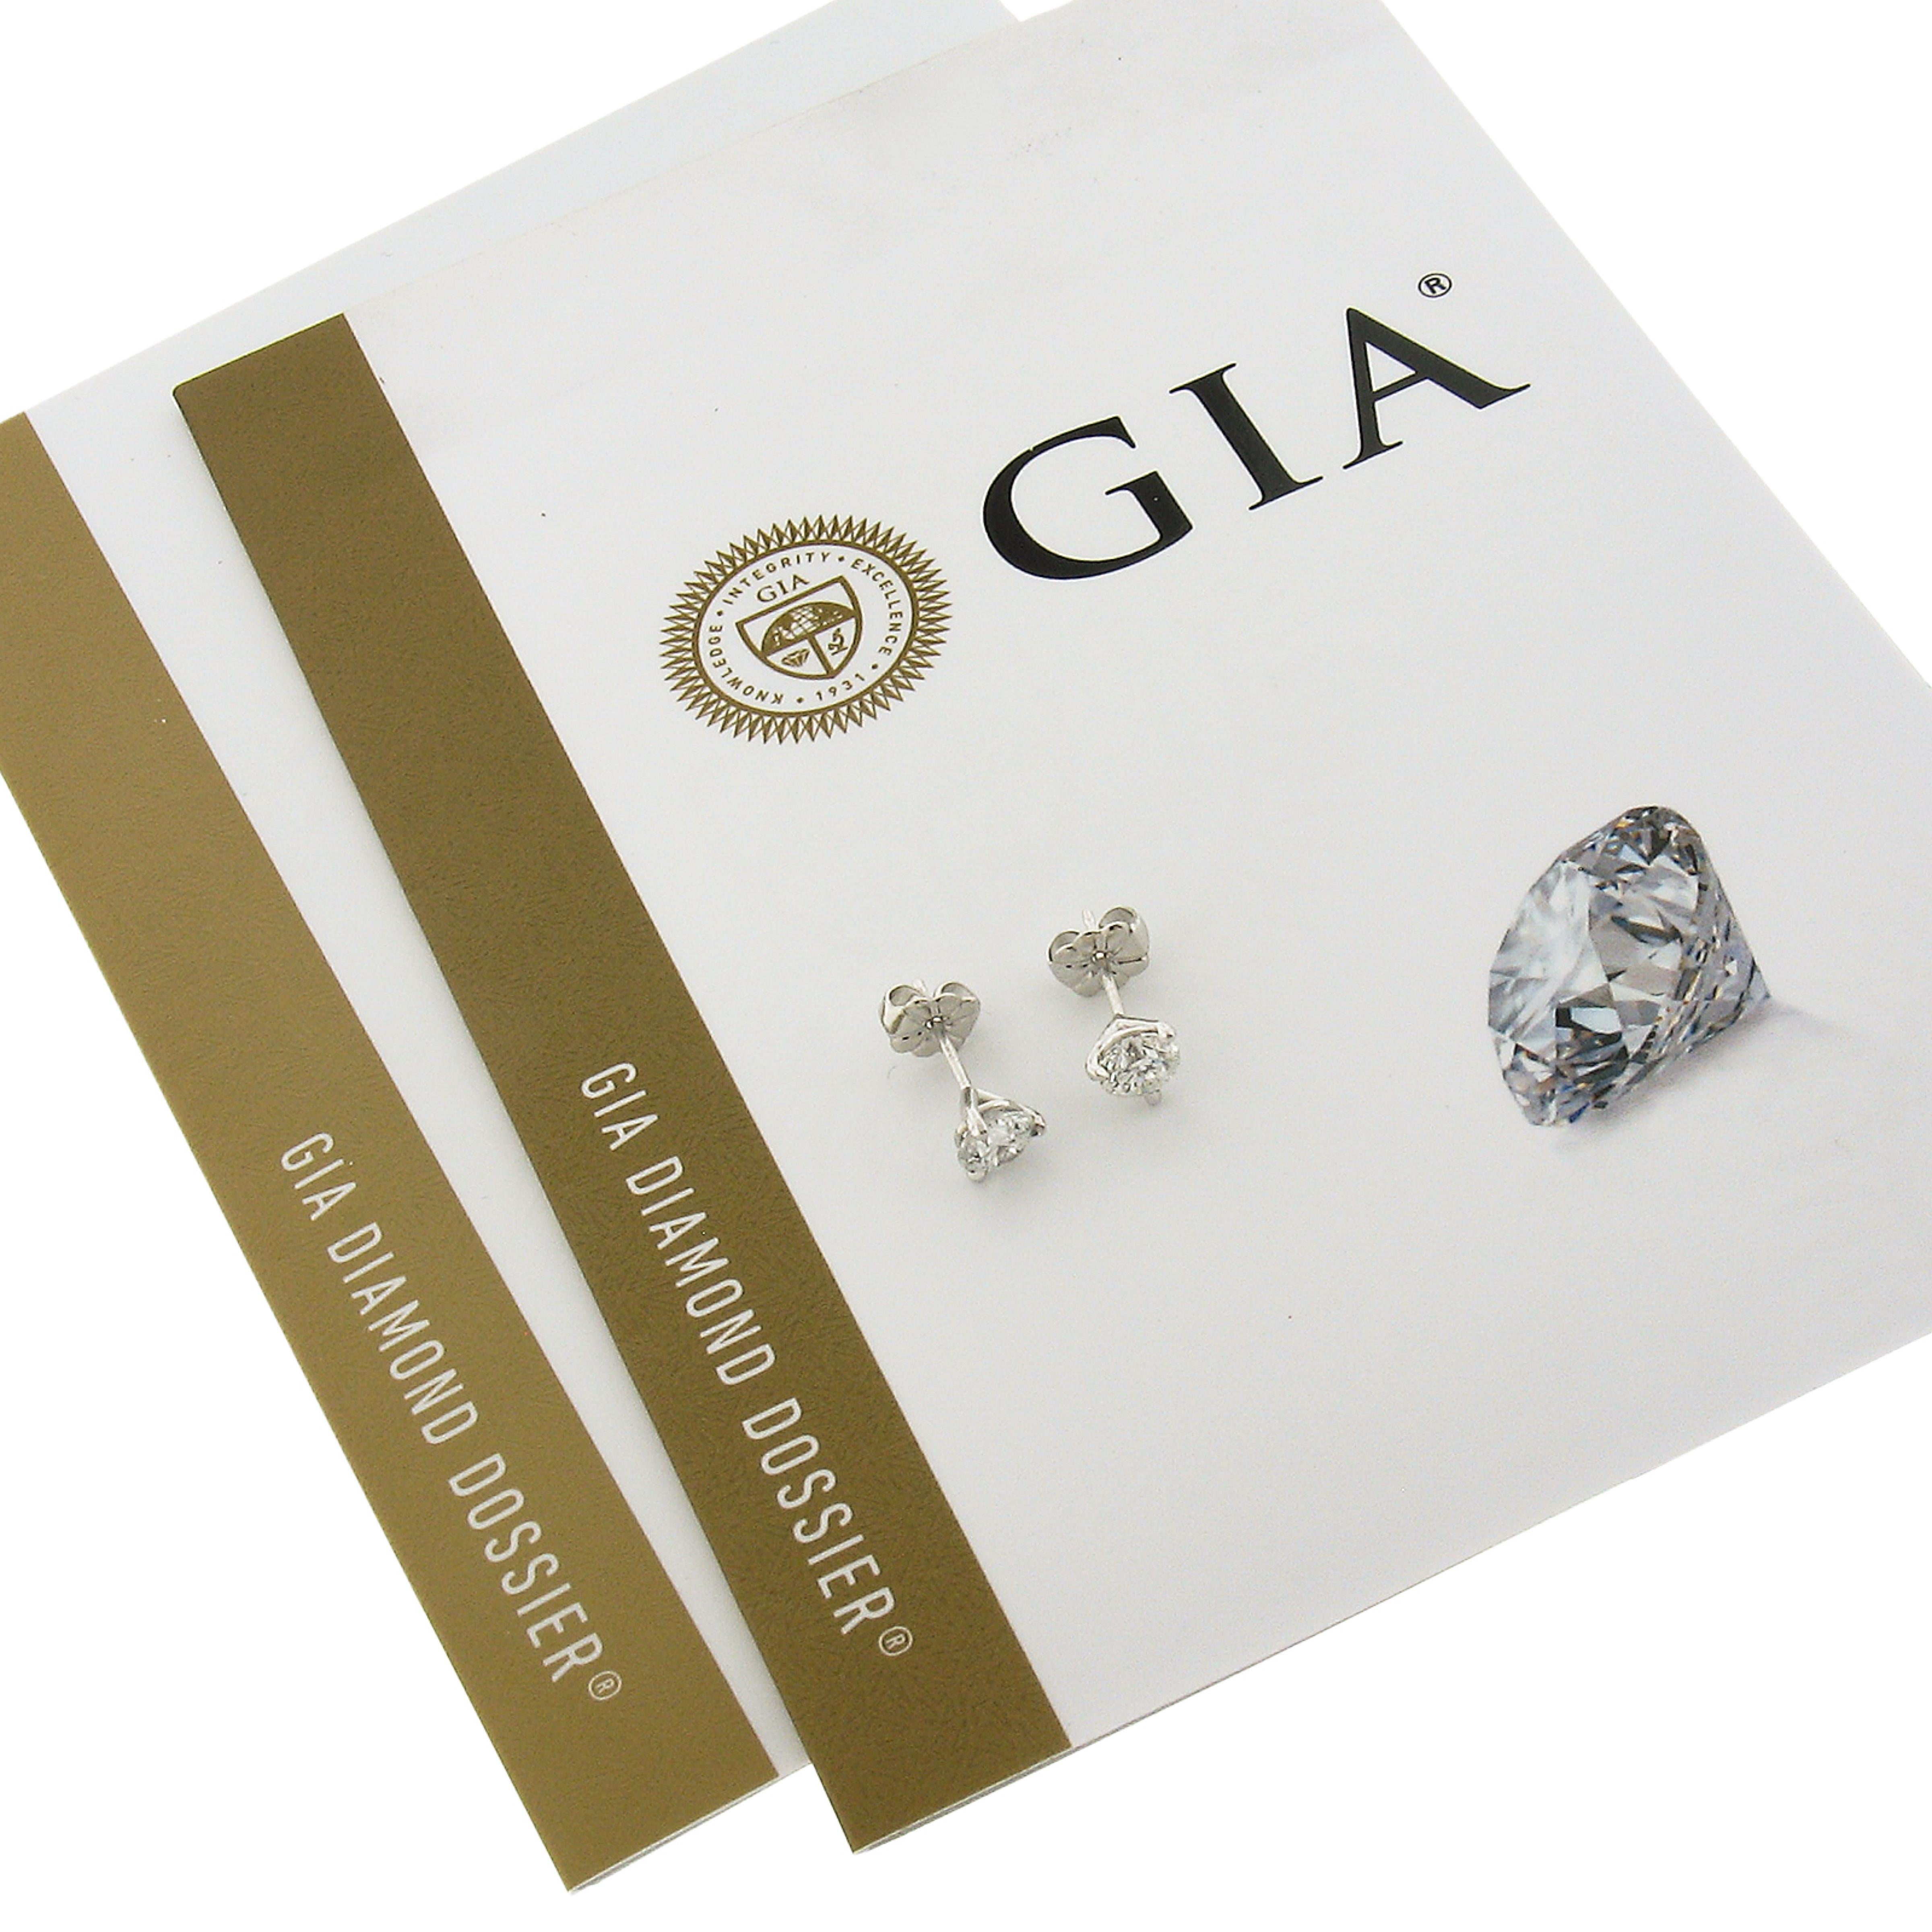 This elegant pair of diamond stud earrings was newly crafted from solid platinum and features two brilliant and fiery, GIA certified, round martini prong set diamonds. These very fine quality diamonds total exactly 1.03 carats in weight. This pair